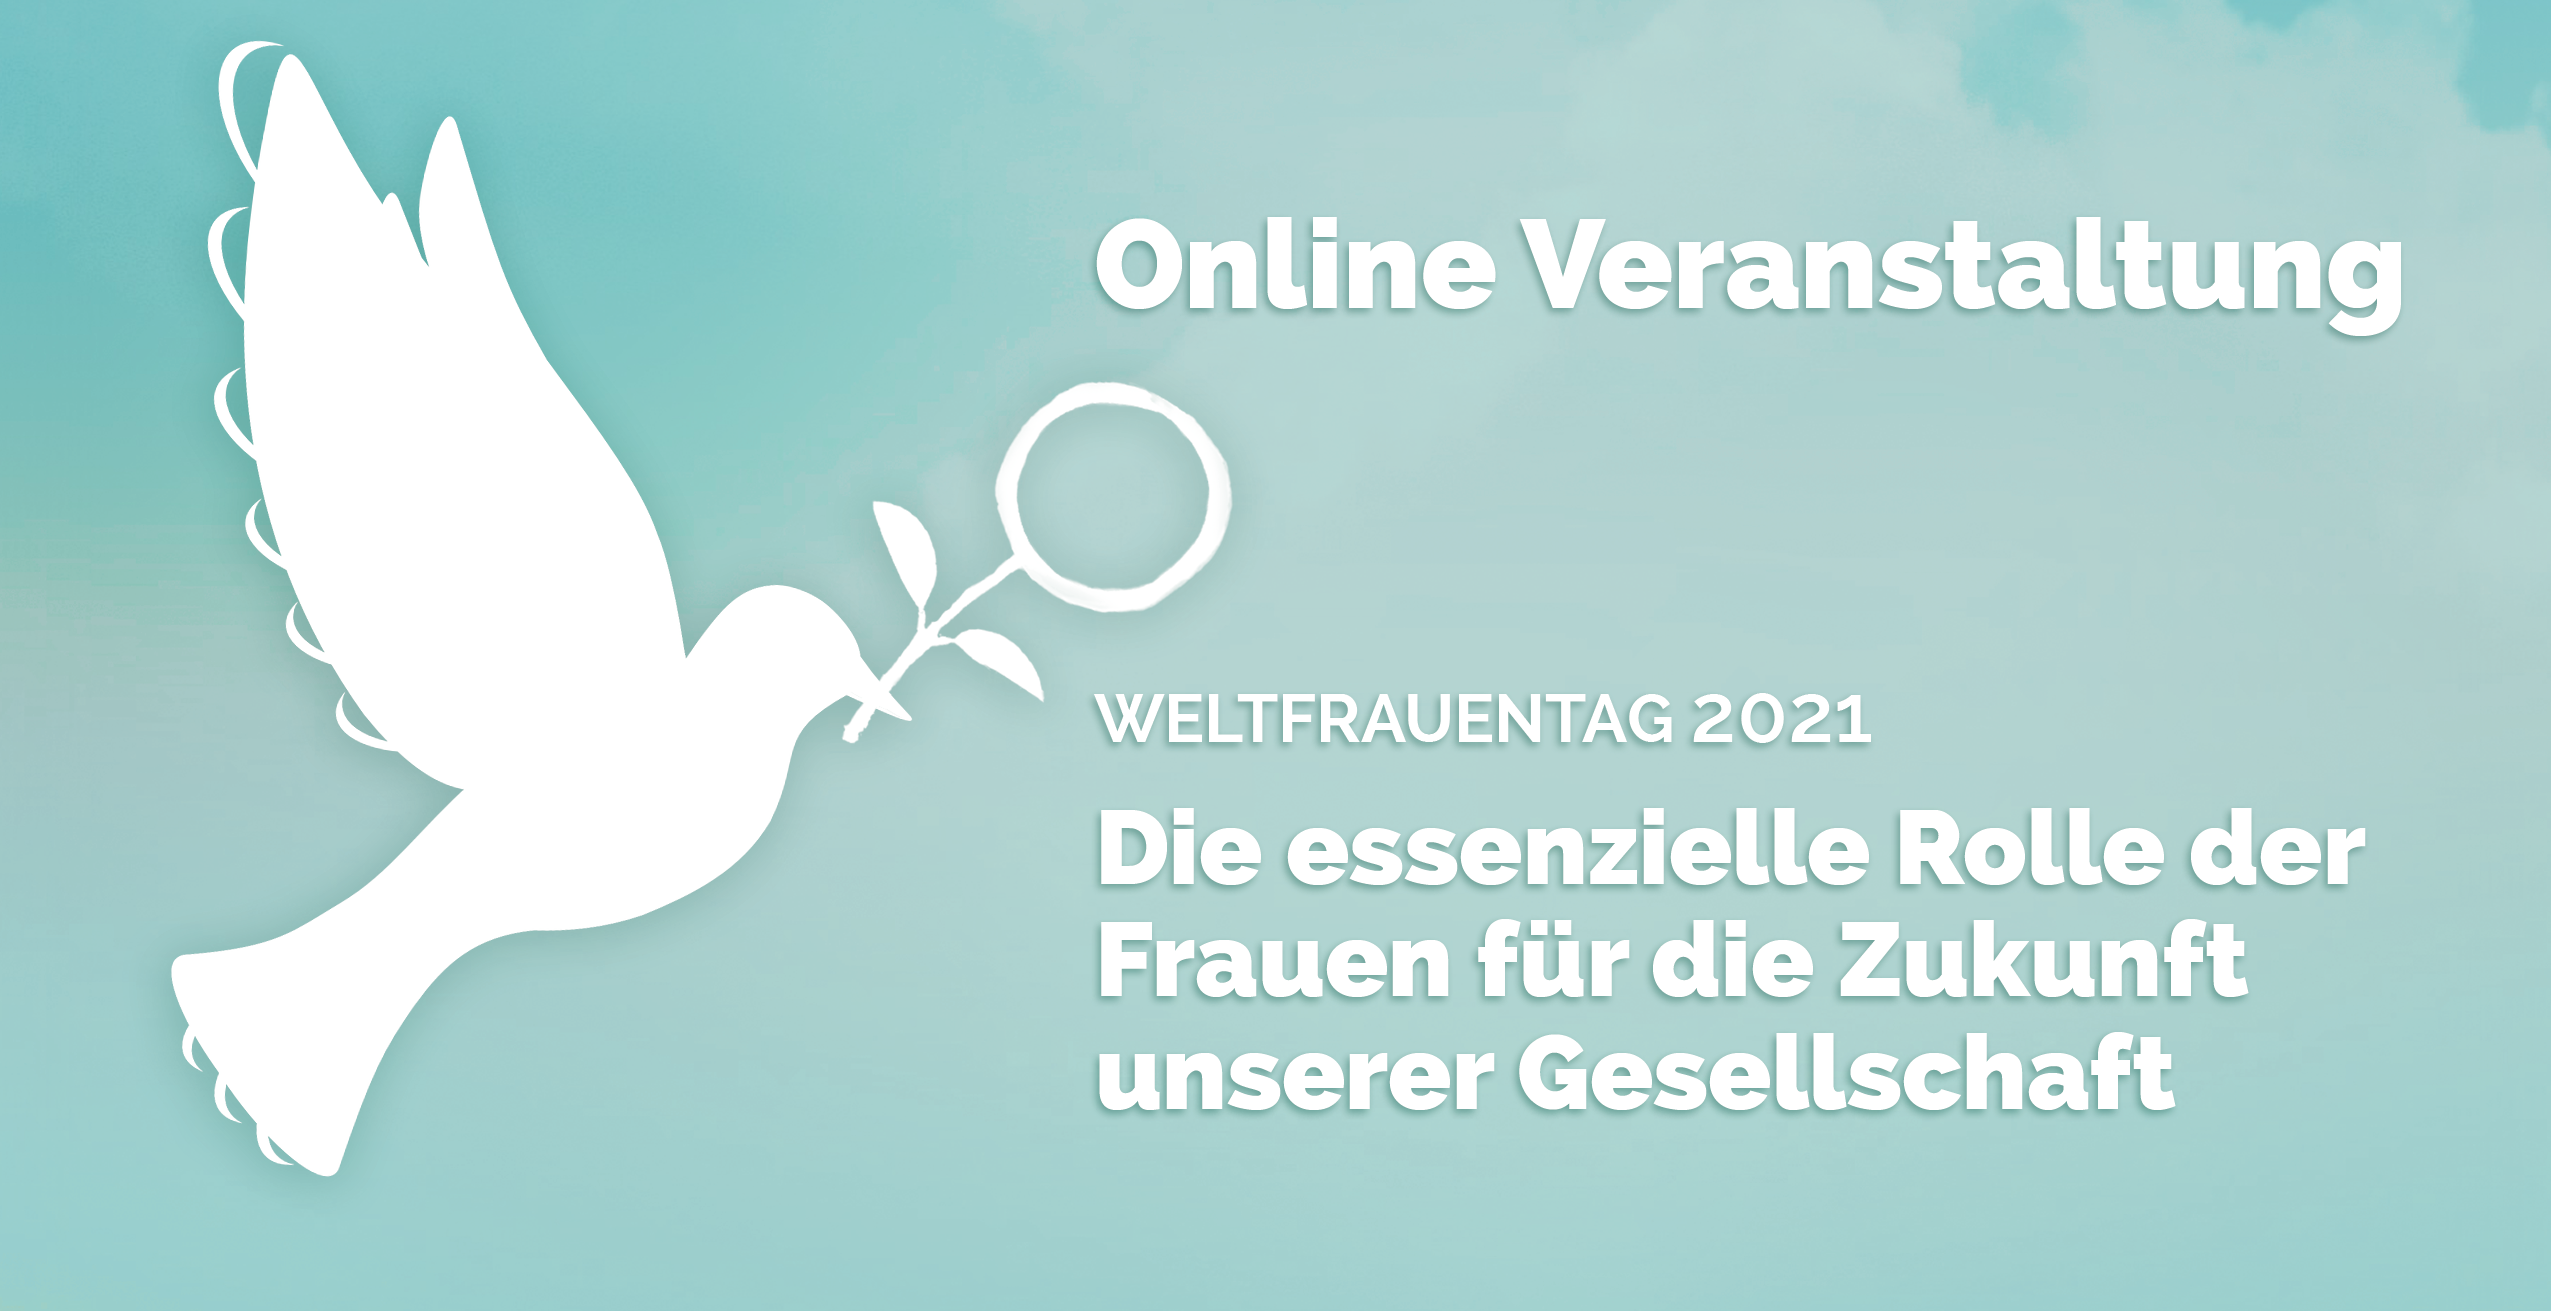 Weltfrauentag 2021